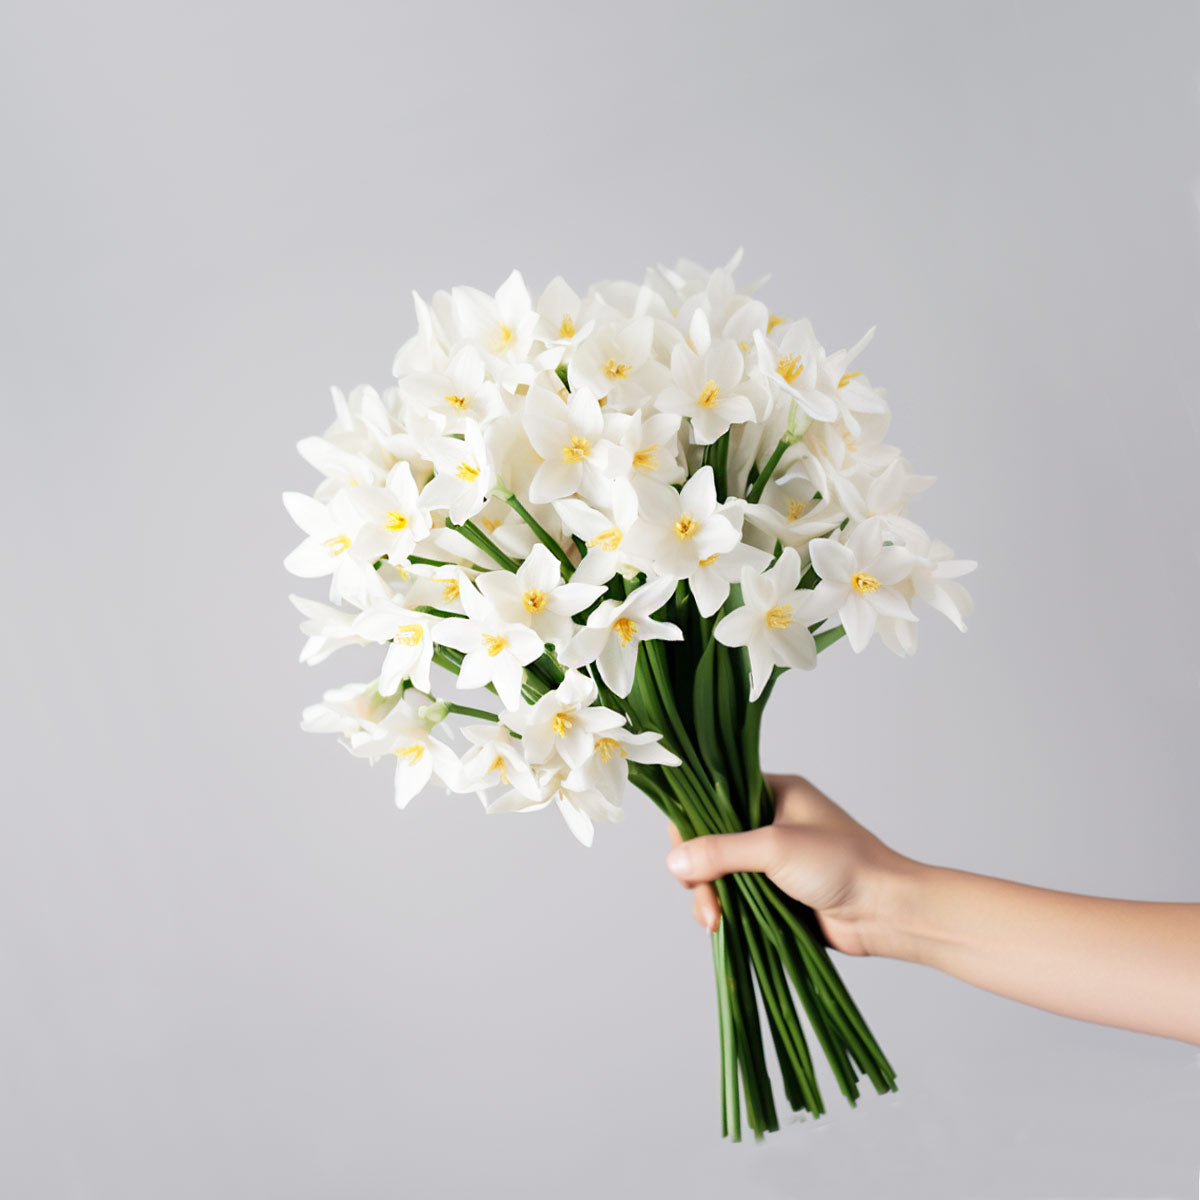 White Narcissus Flower Delivery UK Next Day